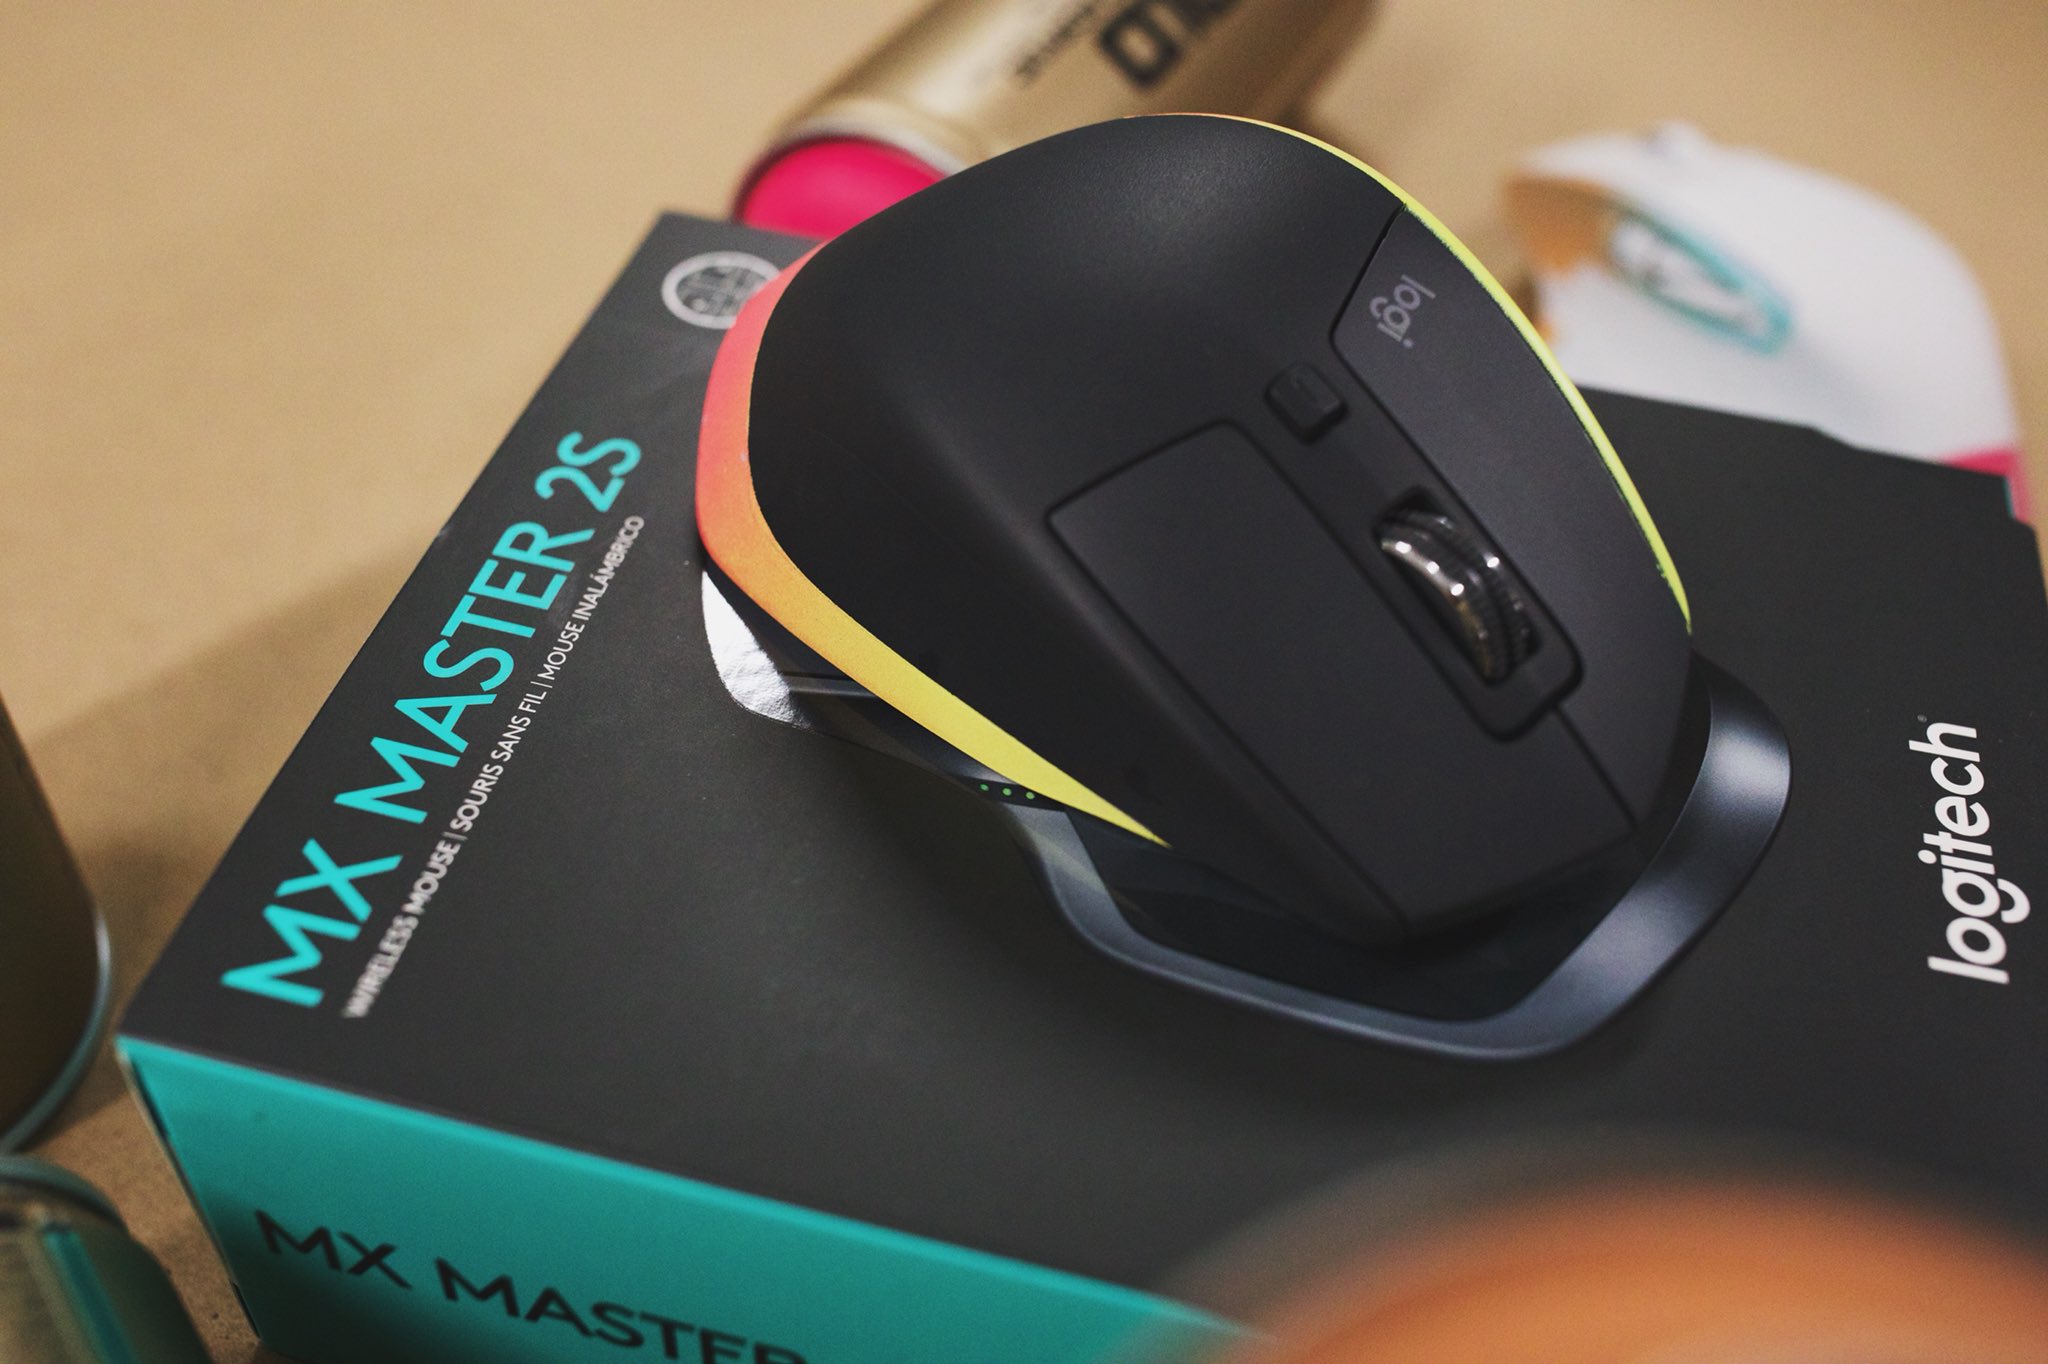 SLOTH on Twitter: "Giving away a custom @Logitech mx master 2s mouse  tomorrow 😜 make sure you have your notifications on!  https://t.co/AtUD5ZrYNF" / Twitter